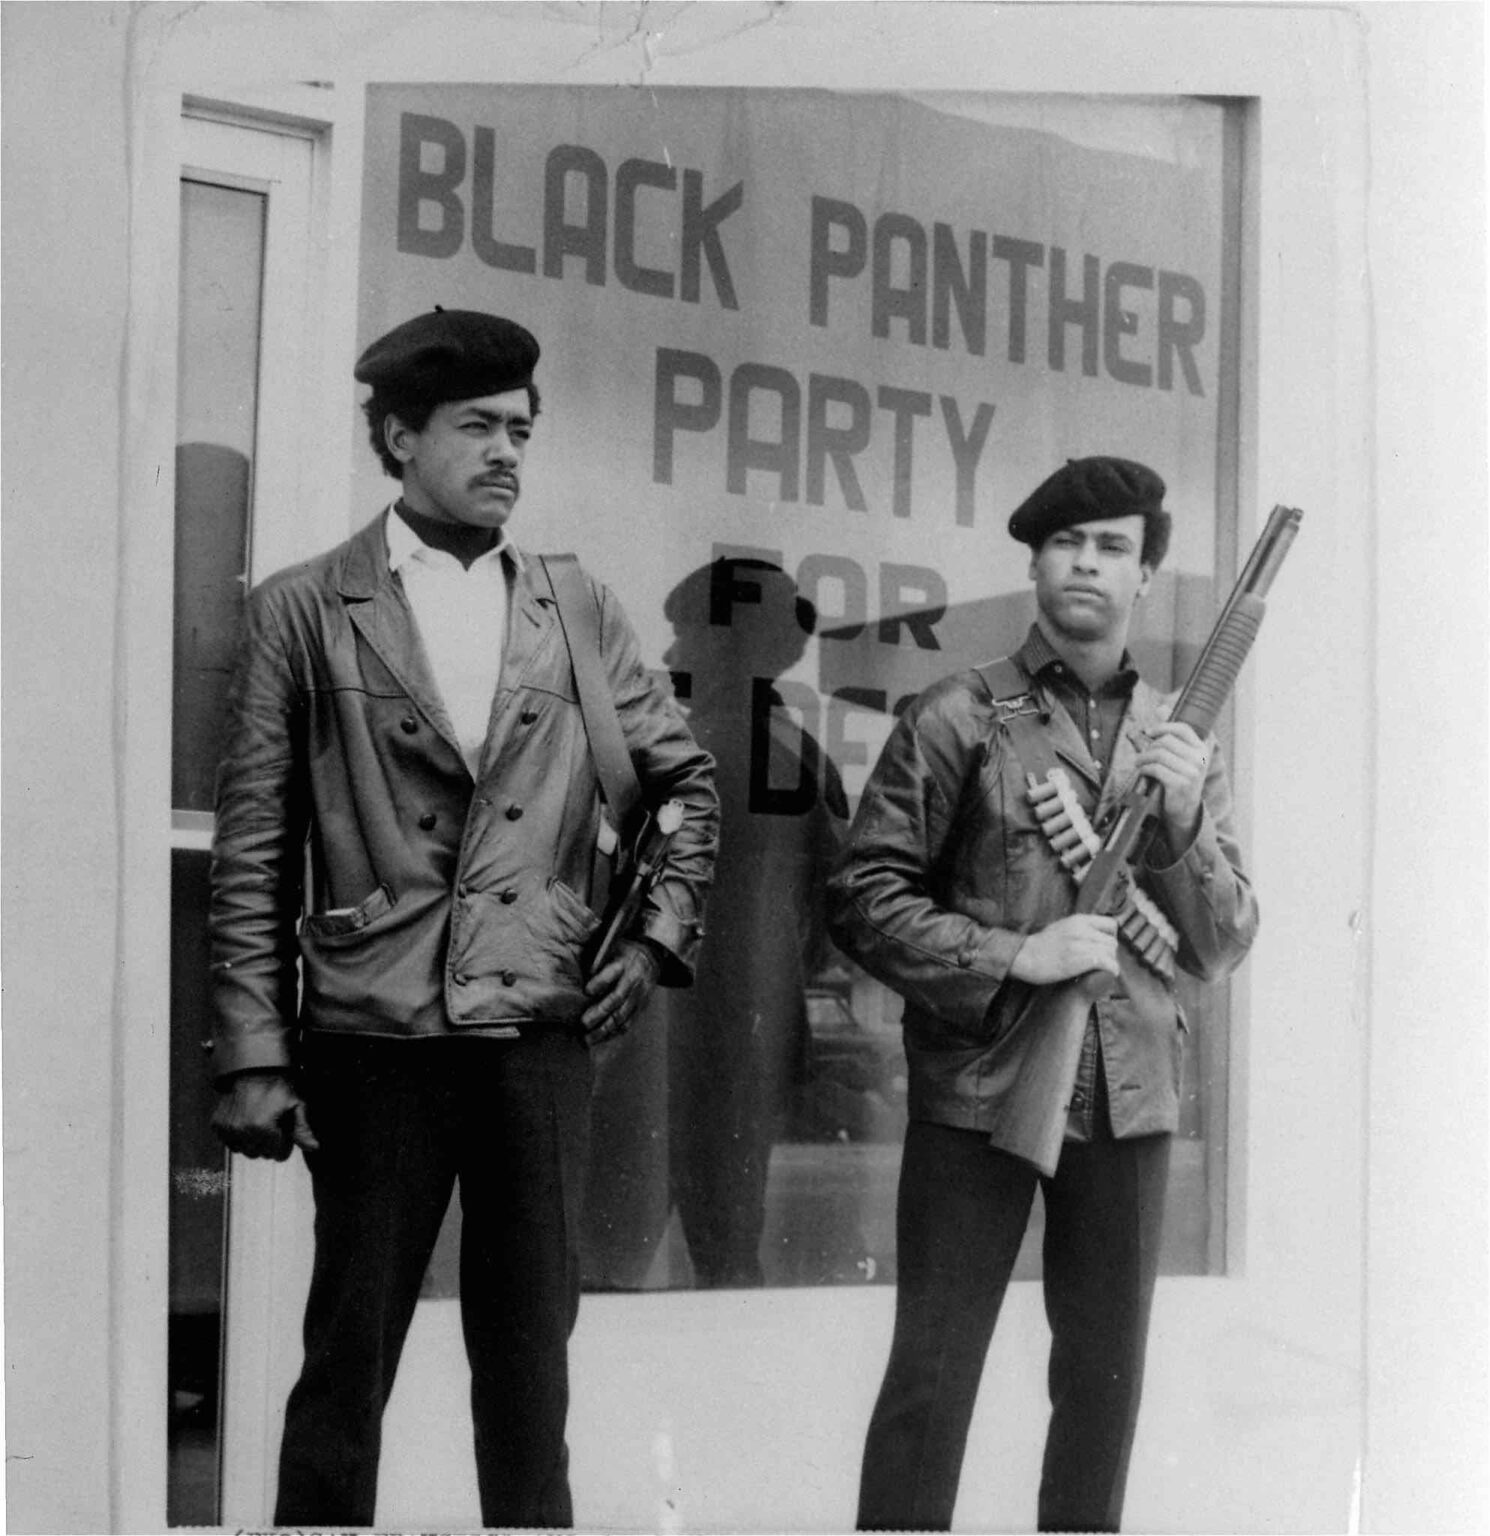 You've definitely heard of The Black Panther Party, but have you truly looked at the people behind the movement? You should know these names too.